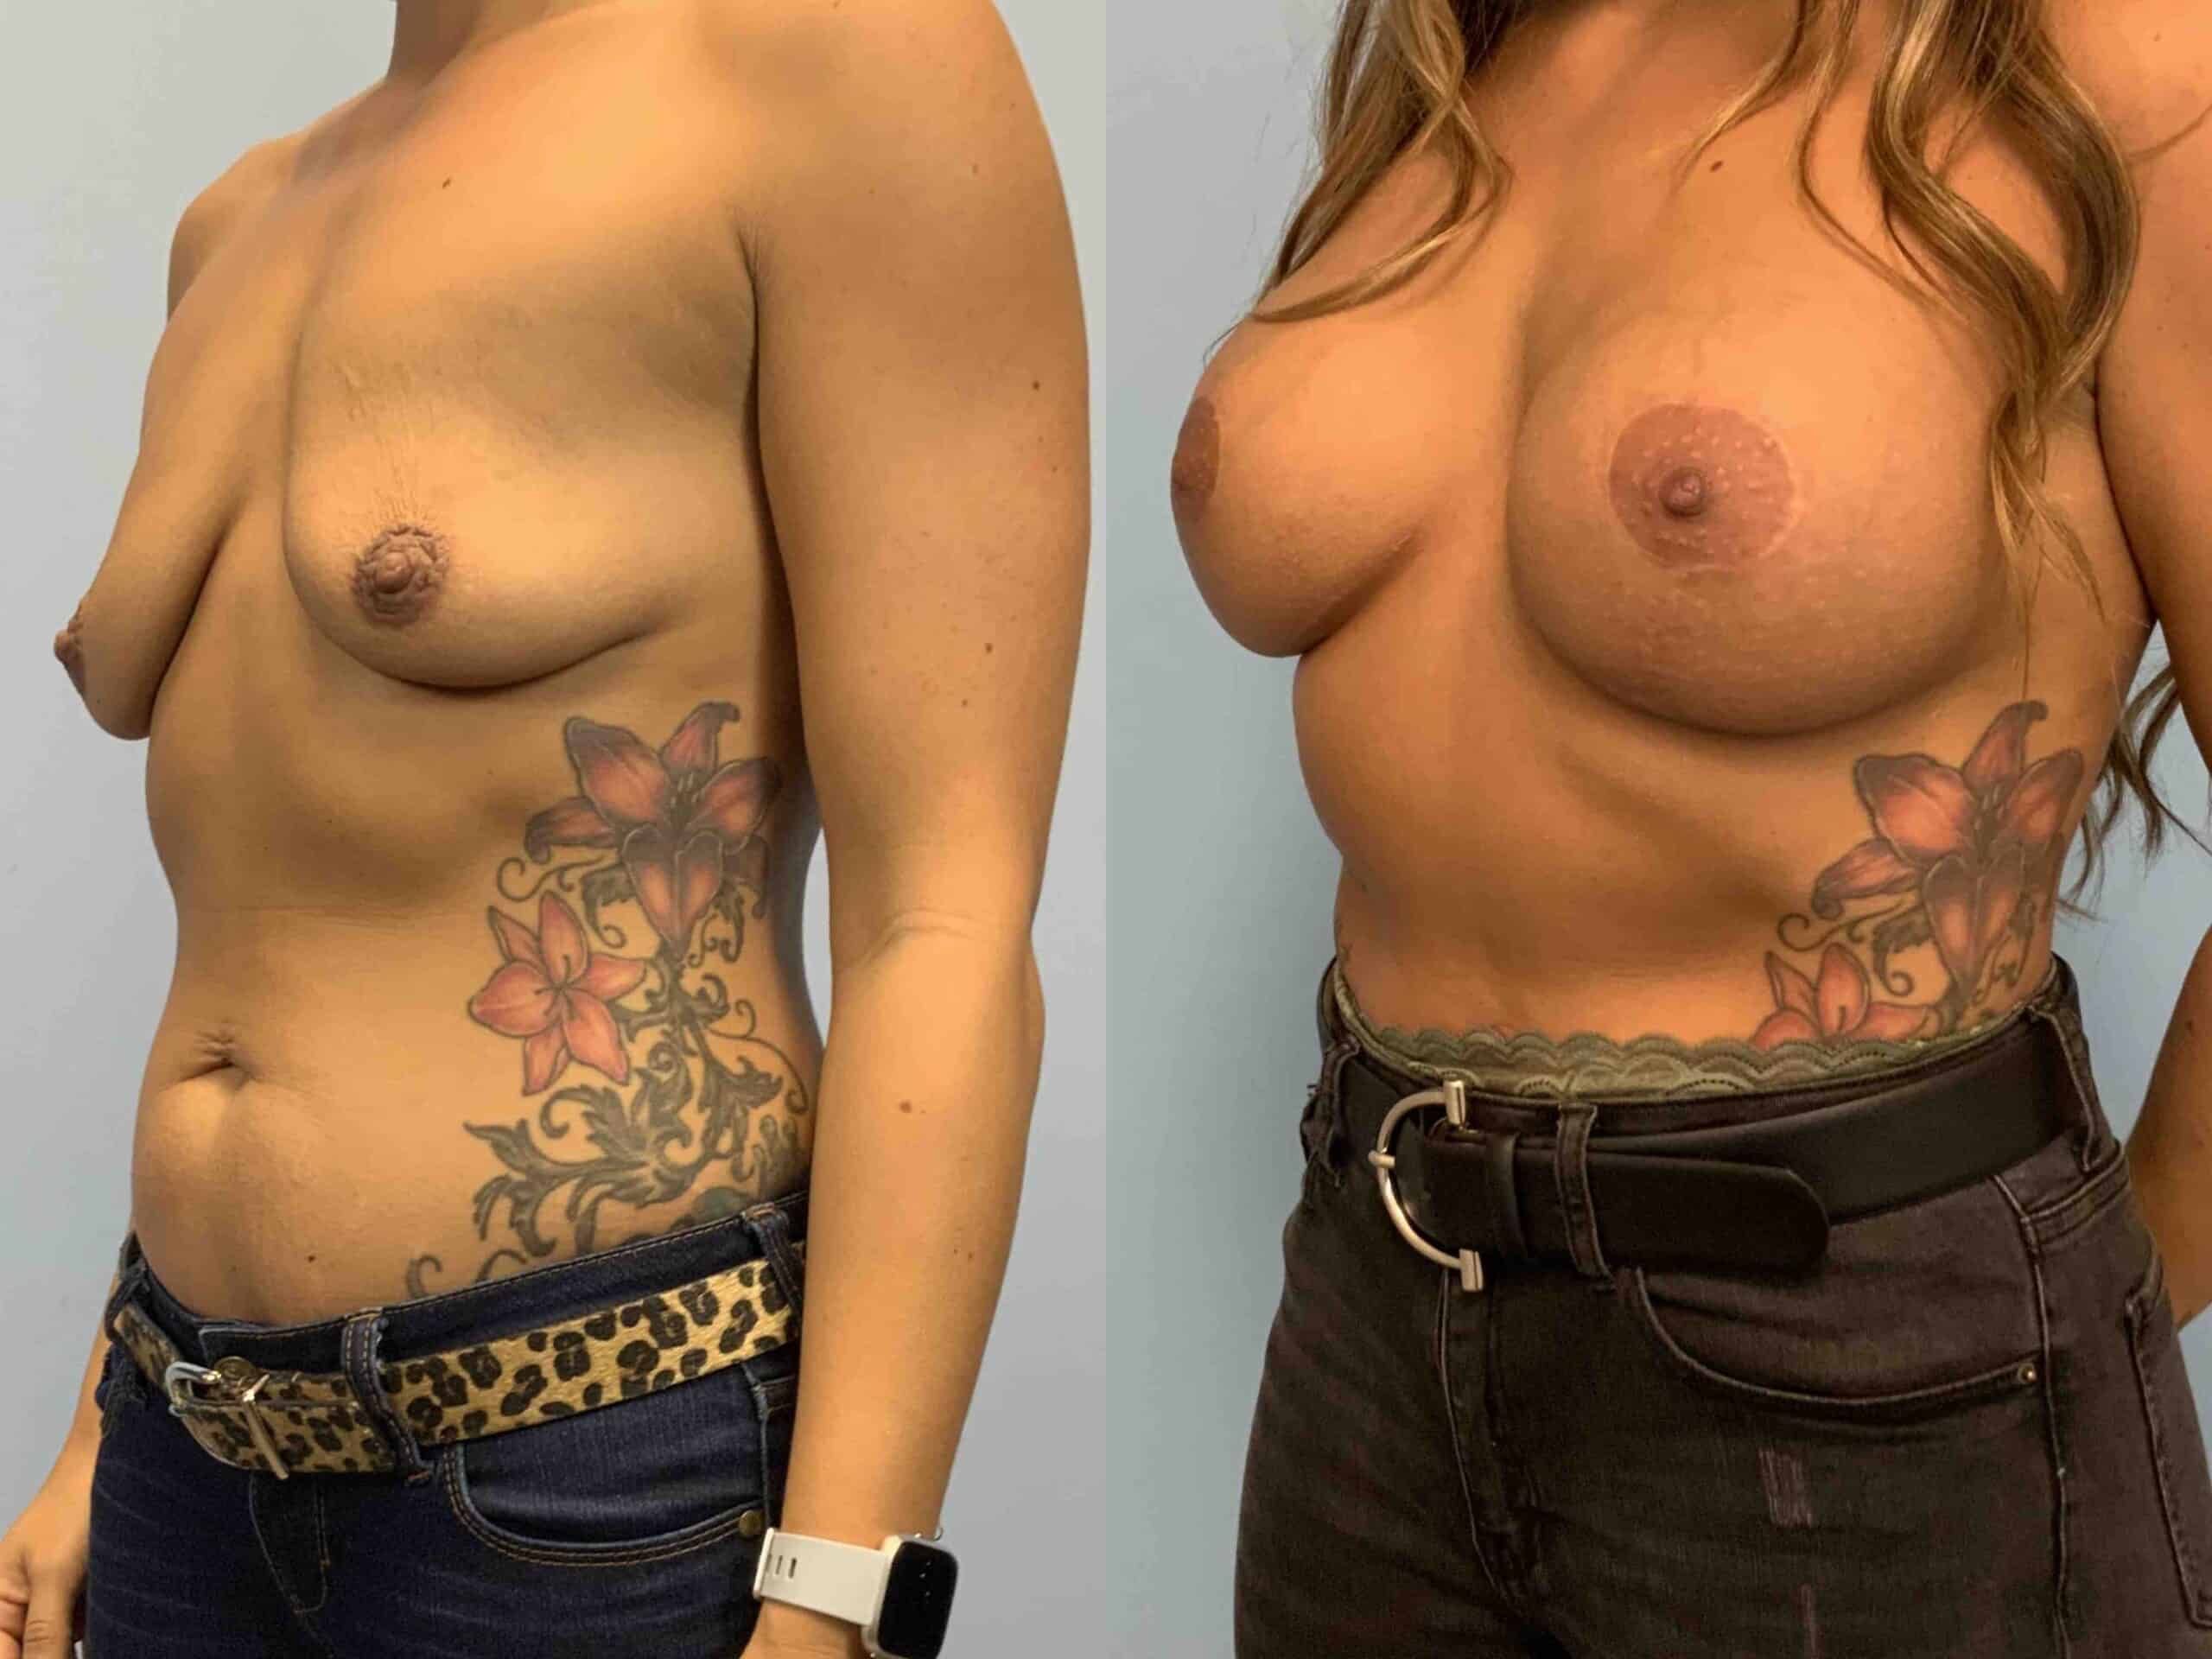 Before and after, 1 yr post op